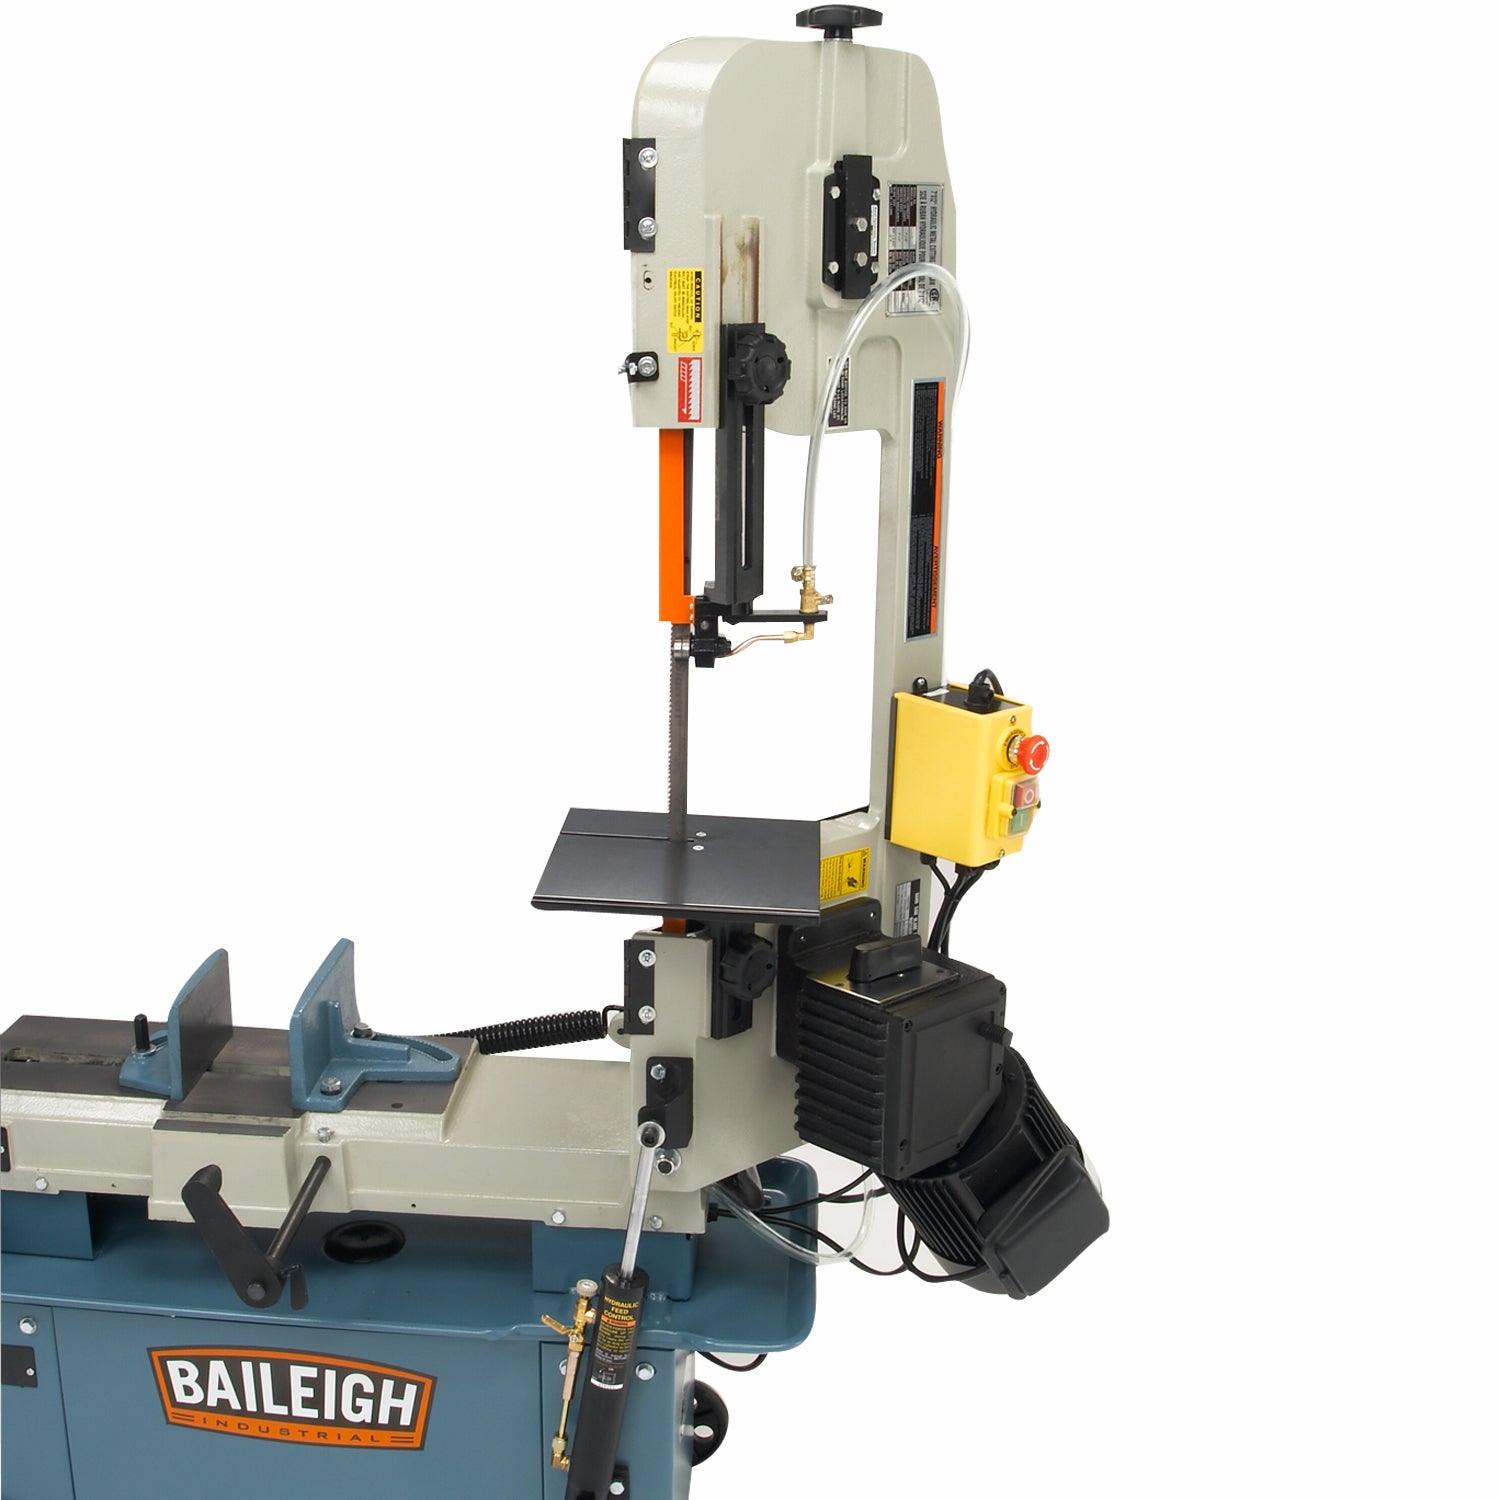 Baileigh BS-712M 110 Volt Metal Cutting Band Saw with Vertical Cutting Option Mitering Vice 3/4" Blade Width